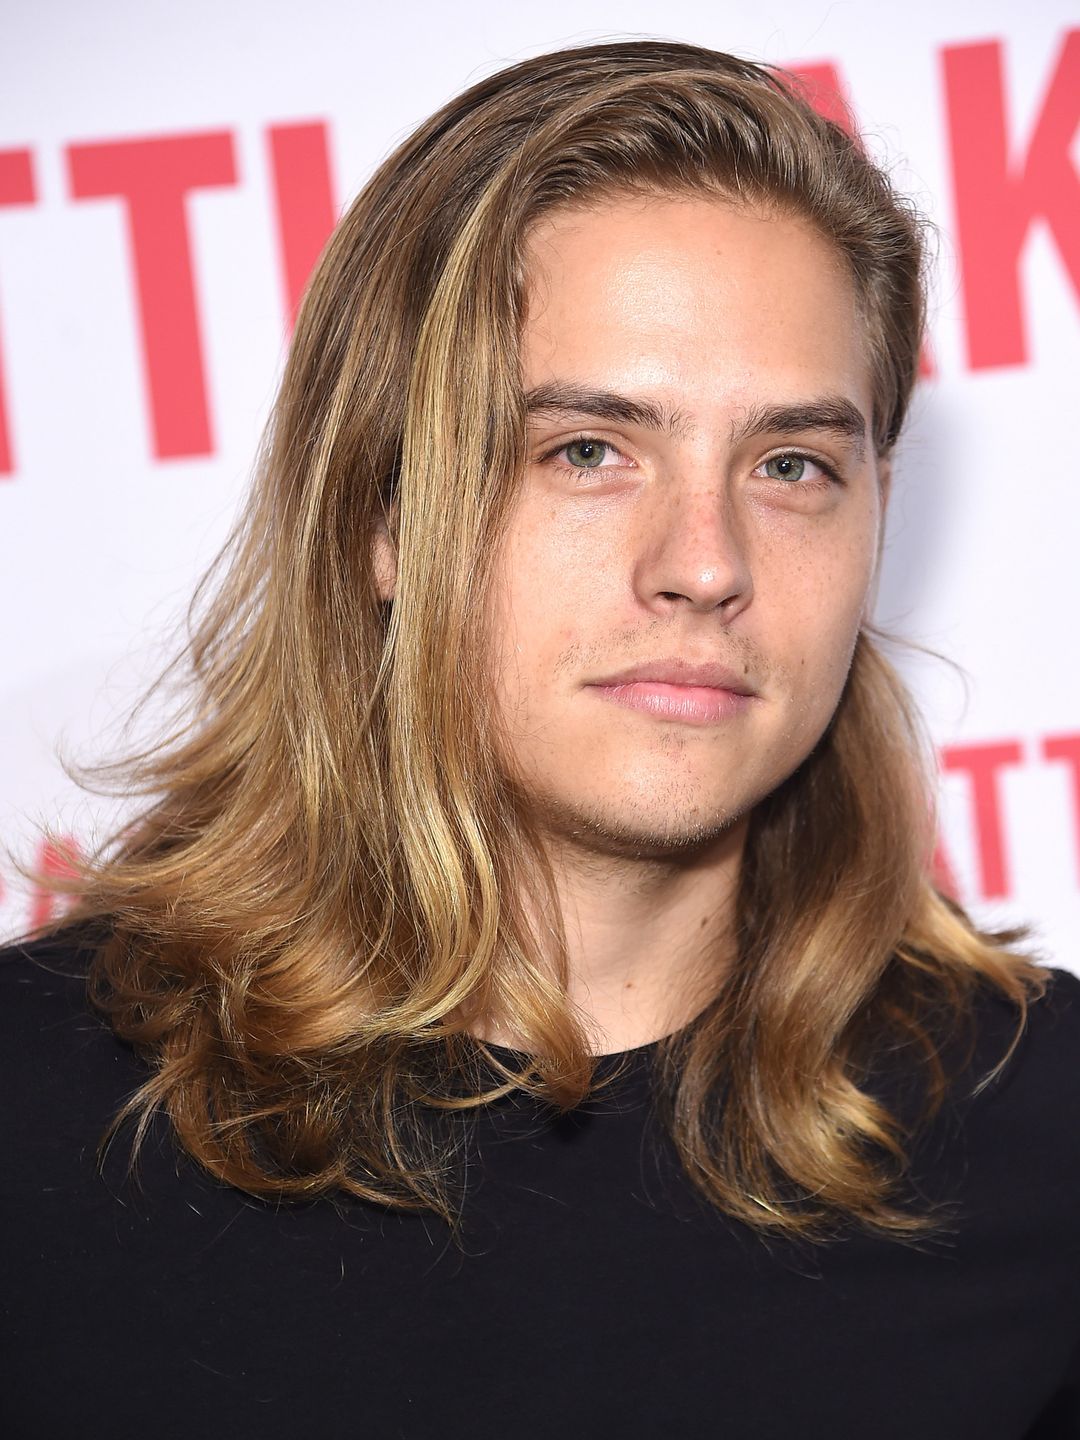 Dylan Sprouse young photos